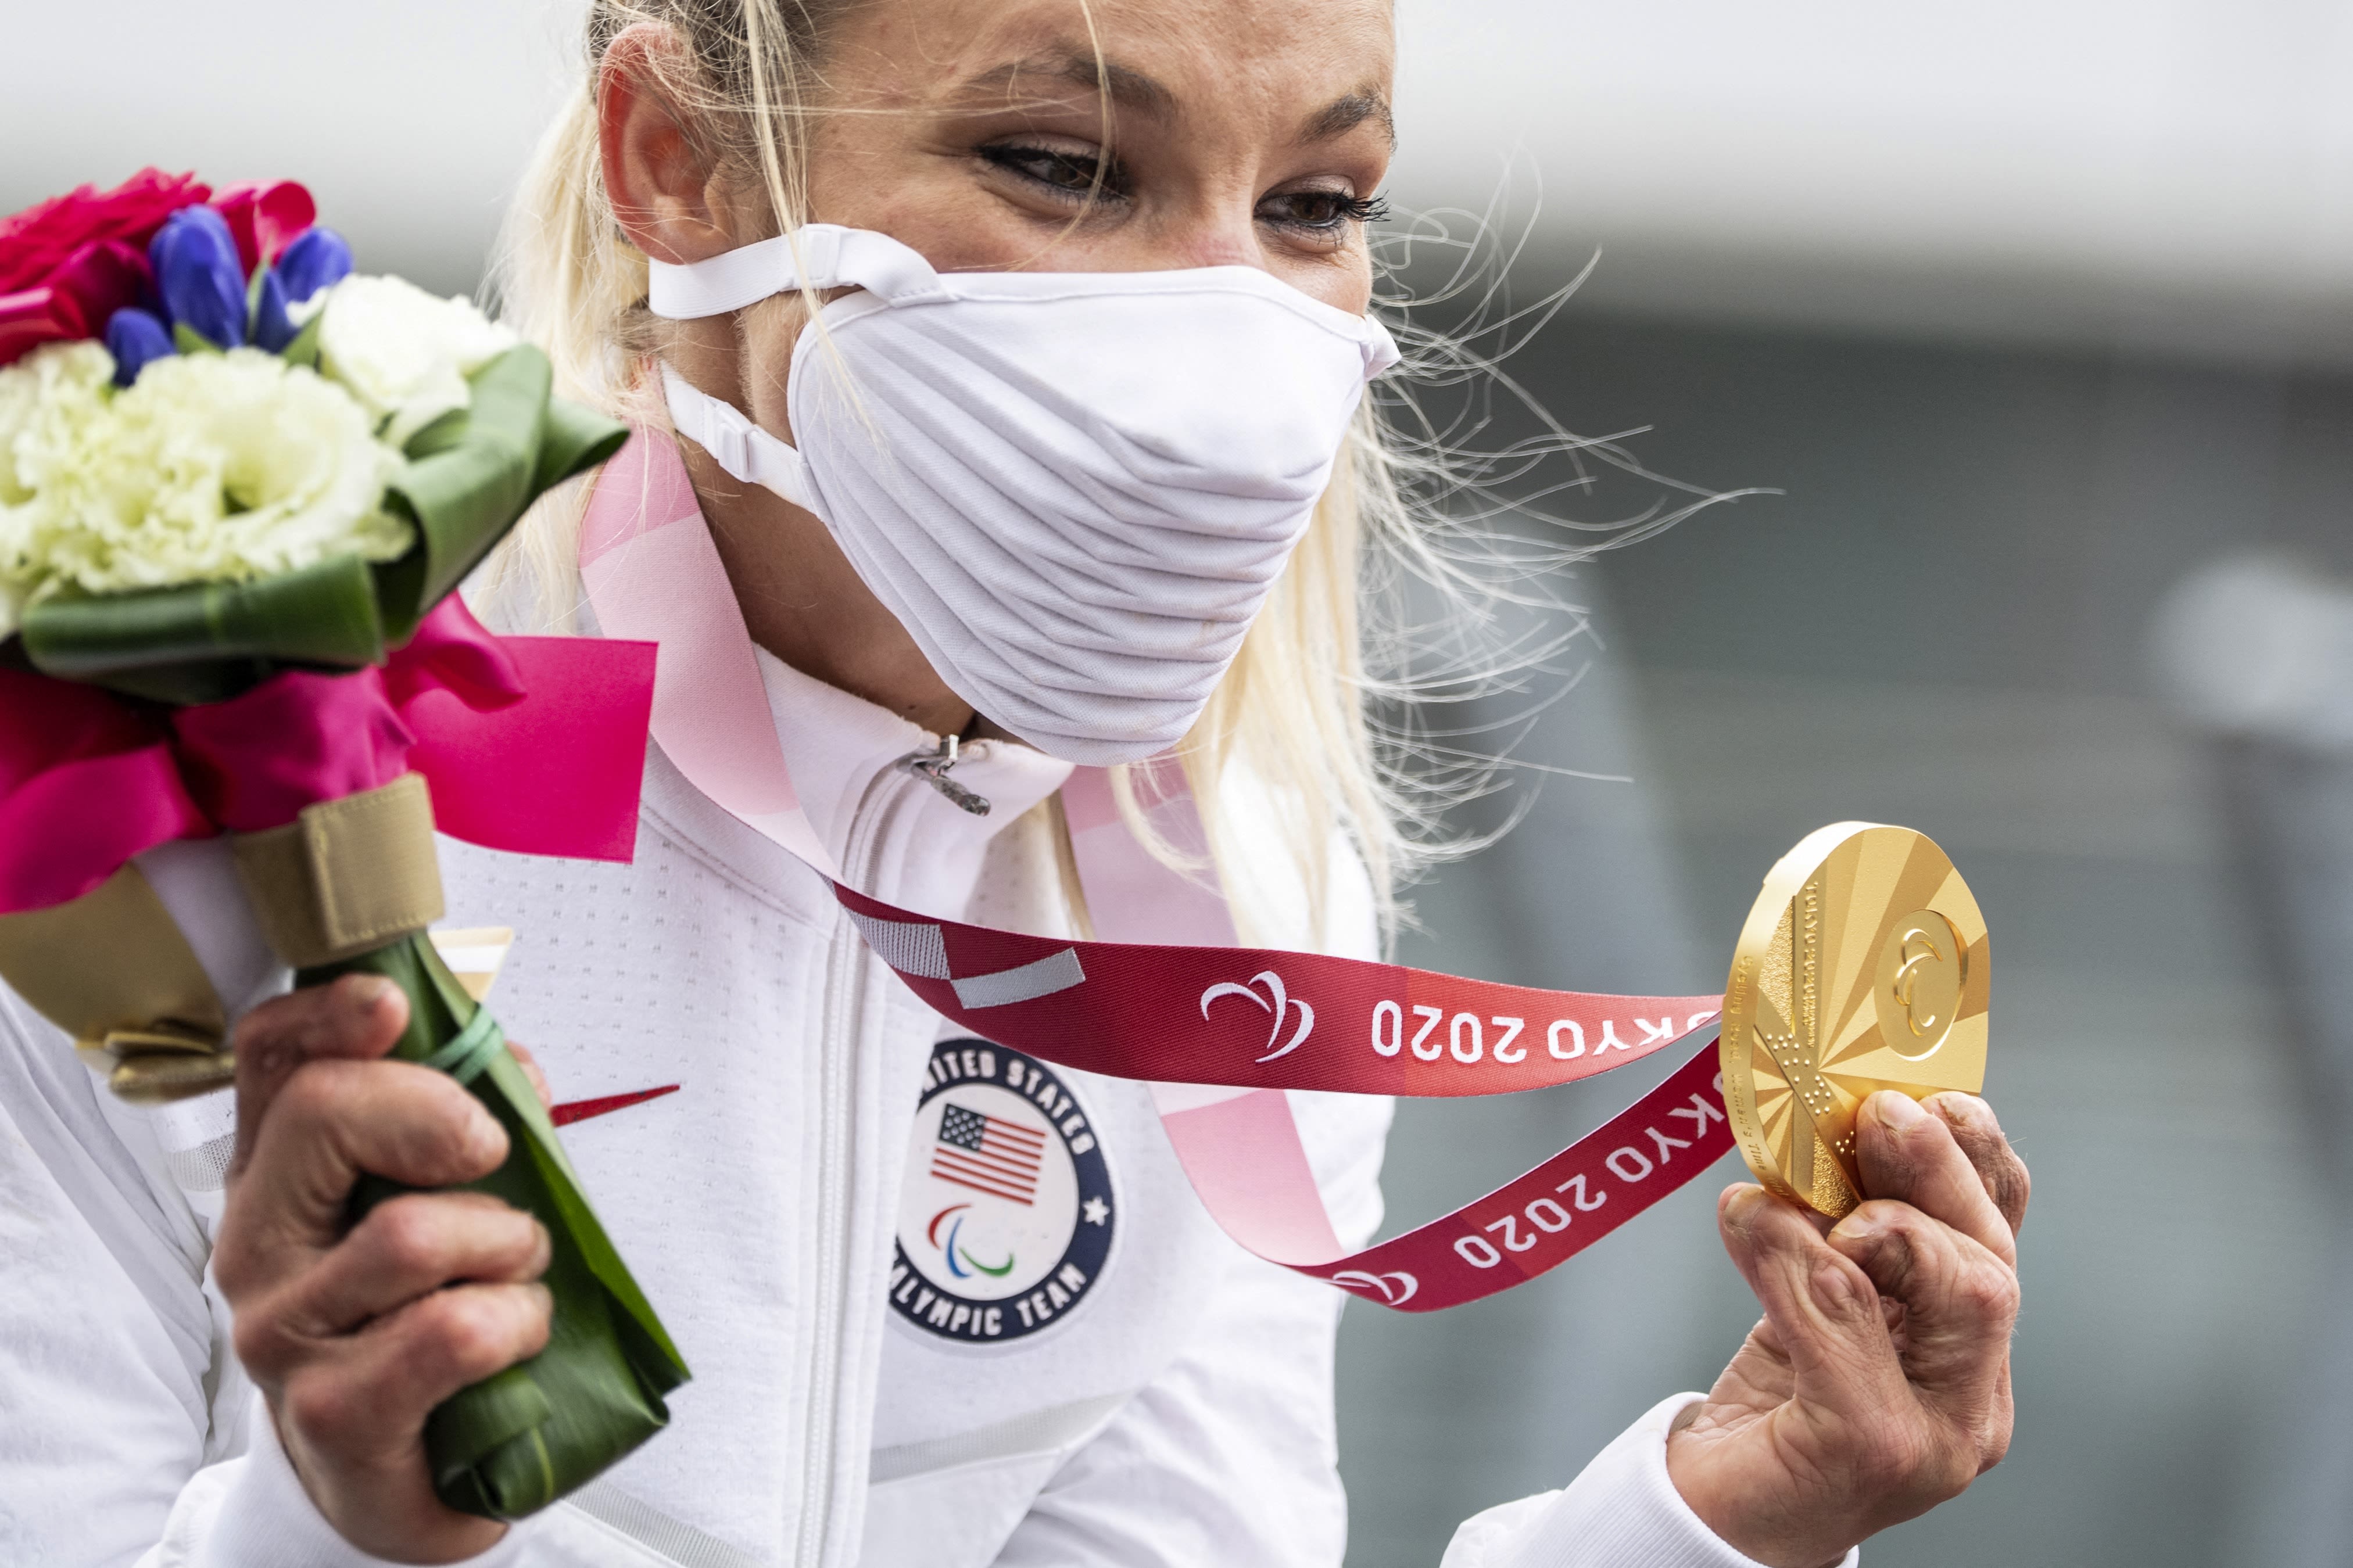 Zakea's medal design reaches the top! - Olympic News